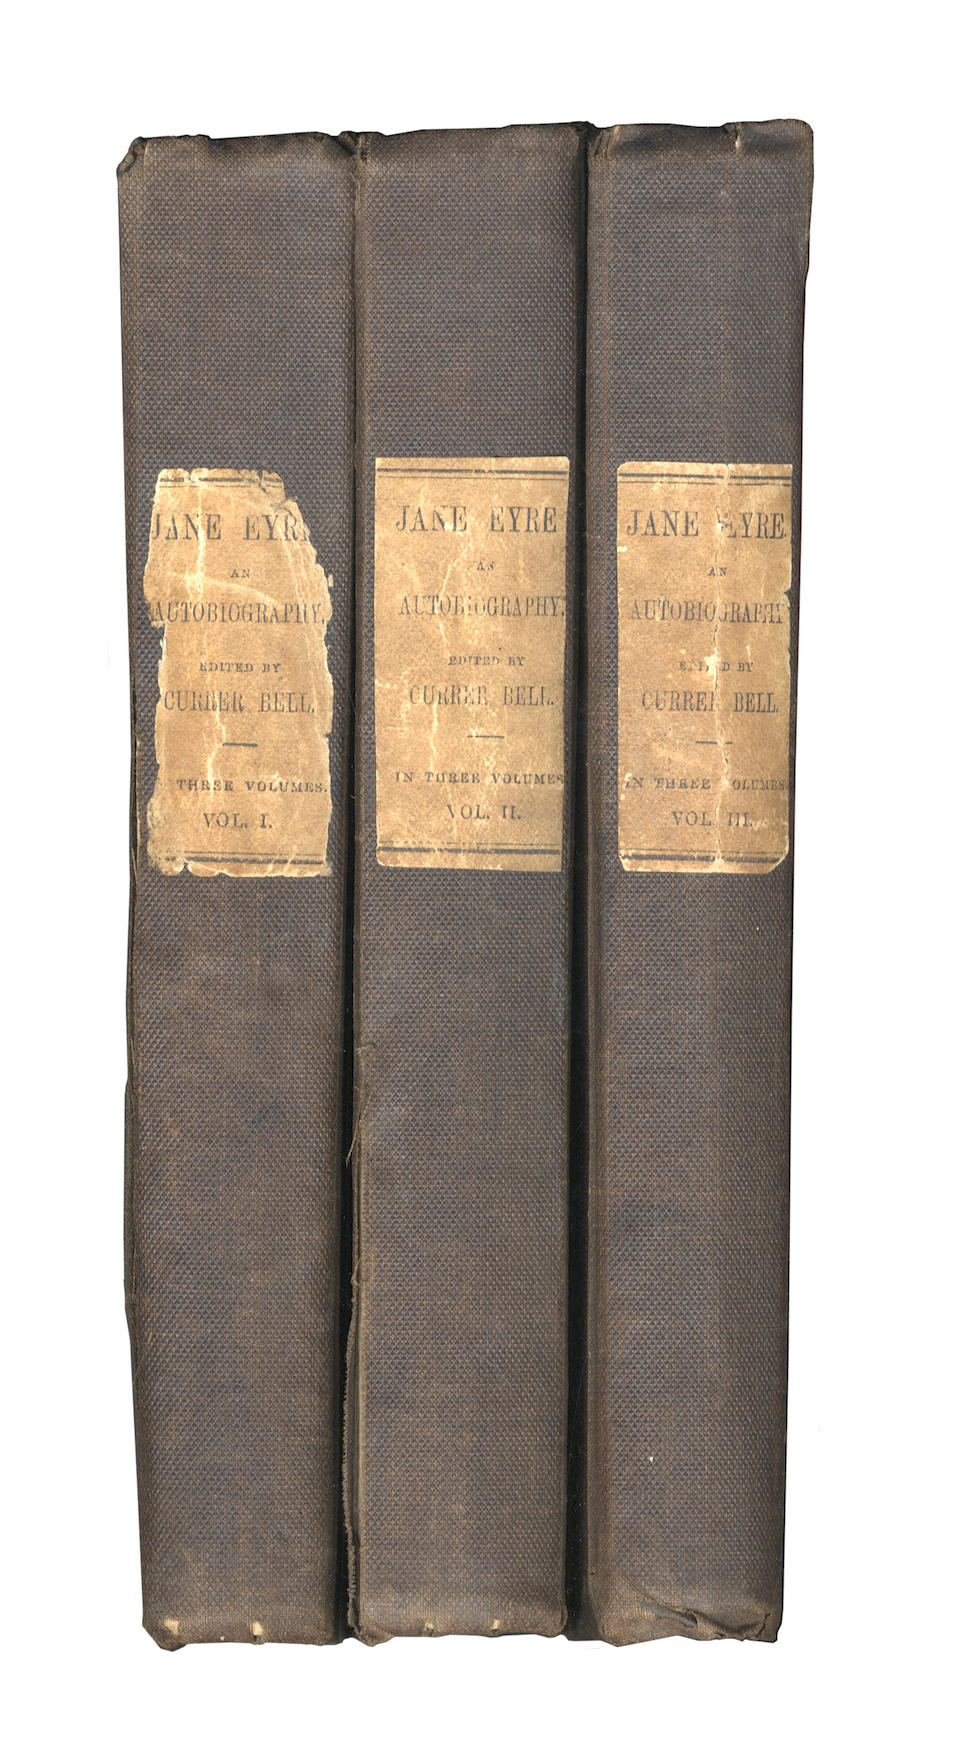 BRONTE (CHARLOTTE) Jane Eyre. An Autobiography, 3 vol., FIRST EDITION, ORIGINAL BOARDS, 1847